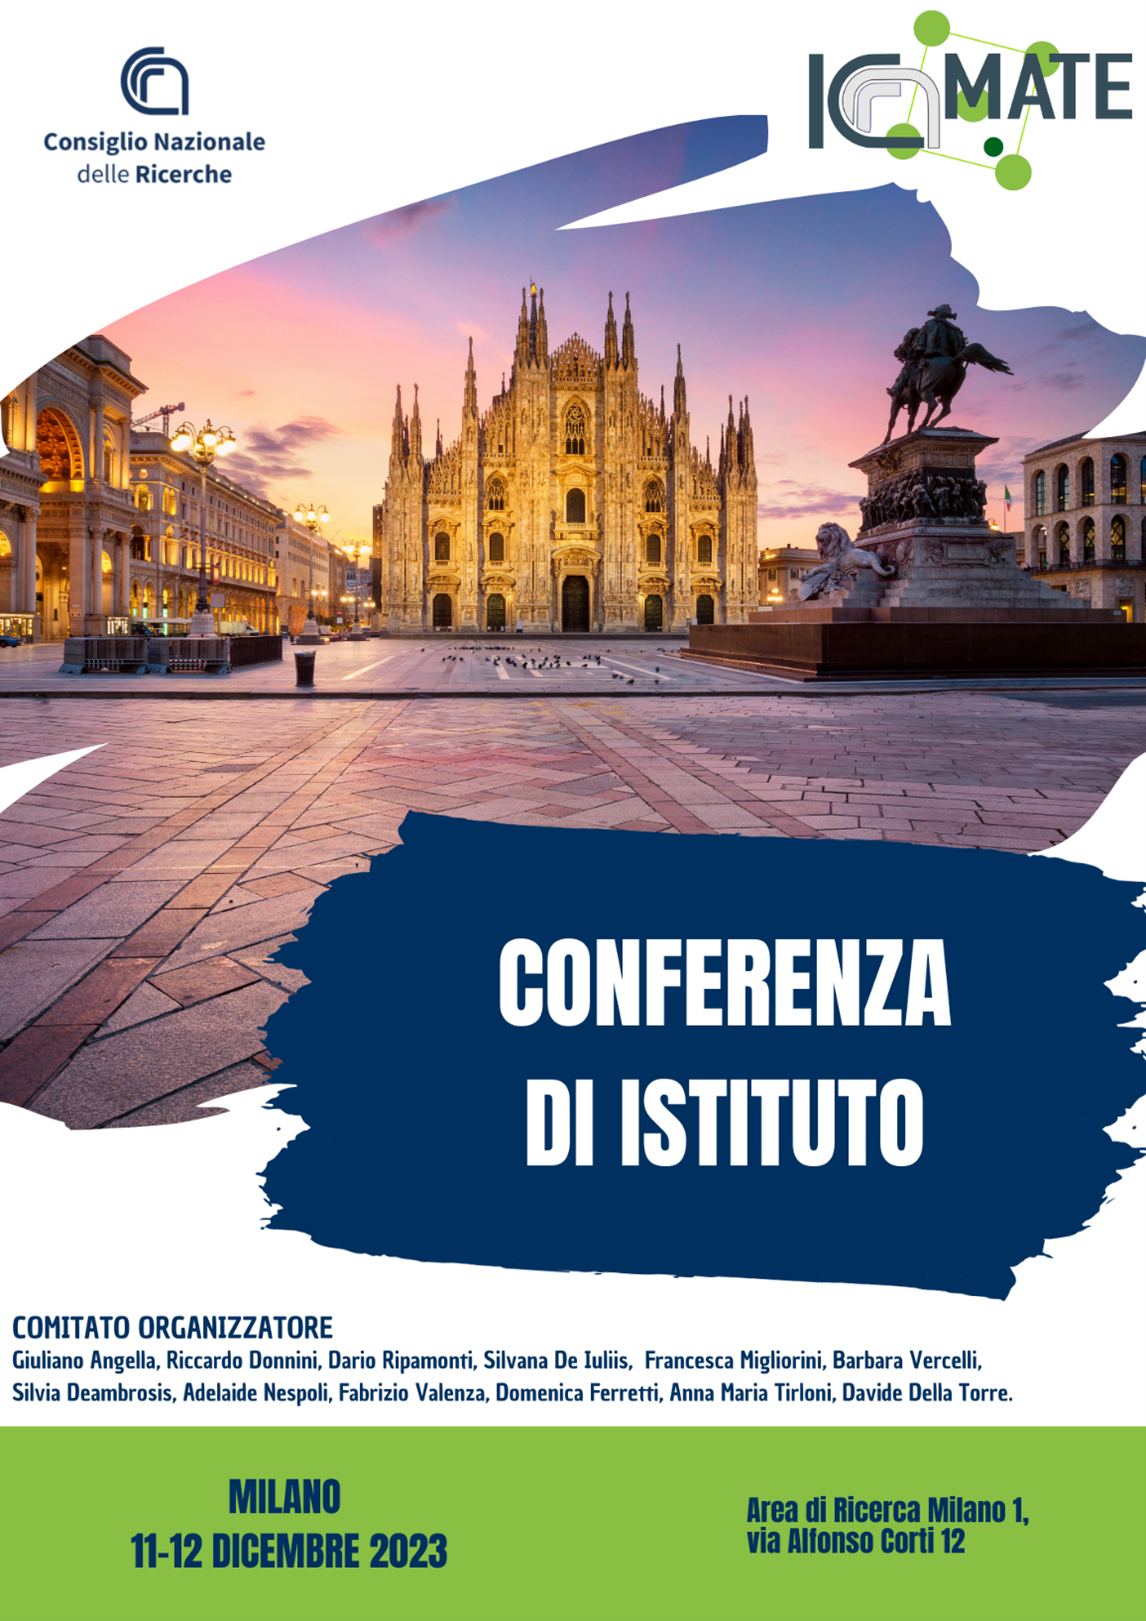 ICMATE and CNR Institute Conference in Milan Brochure